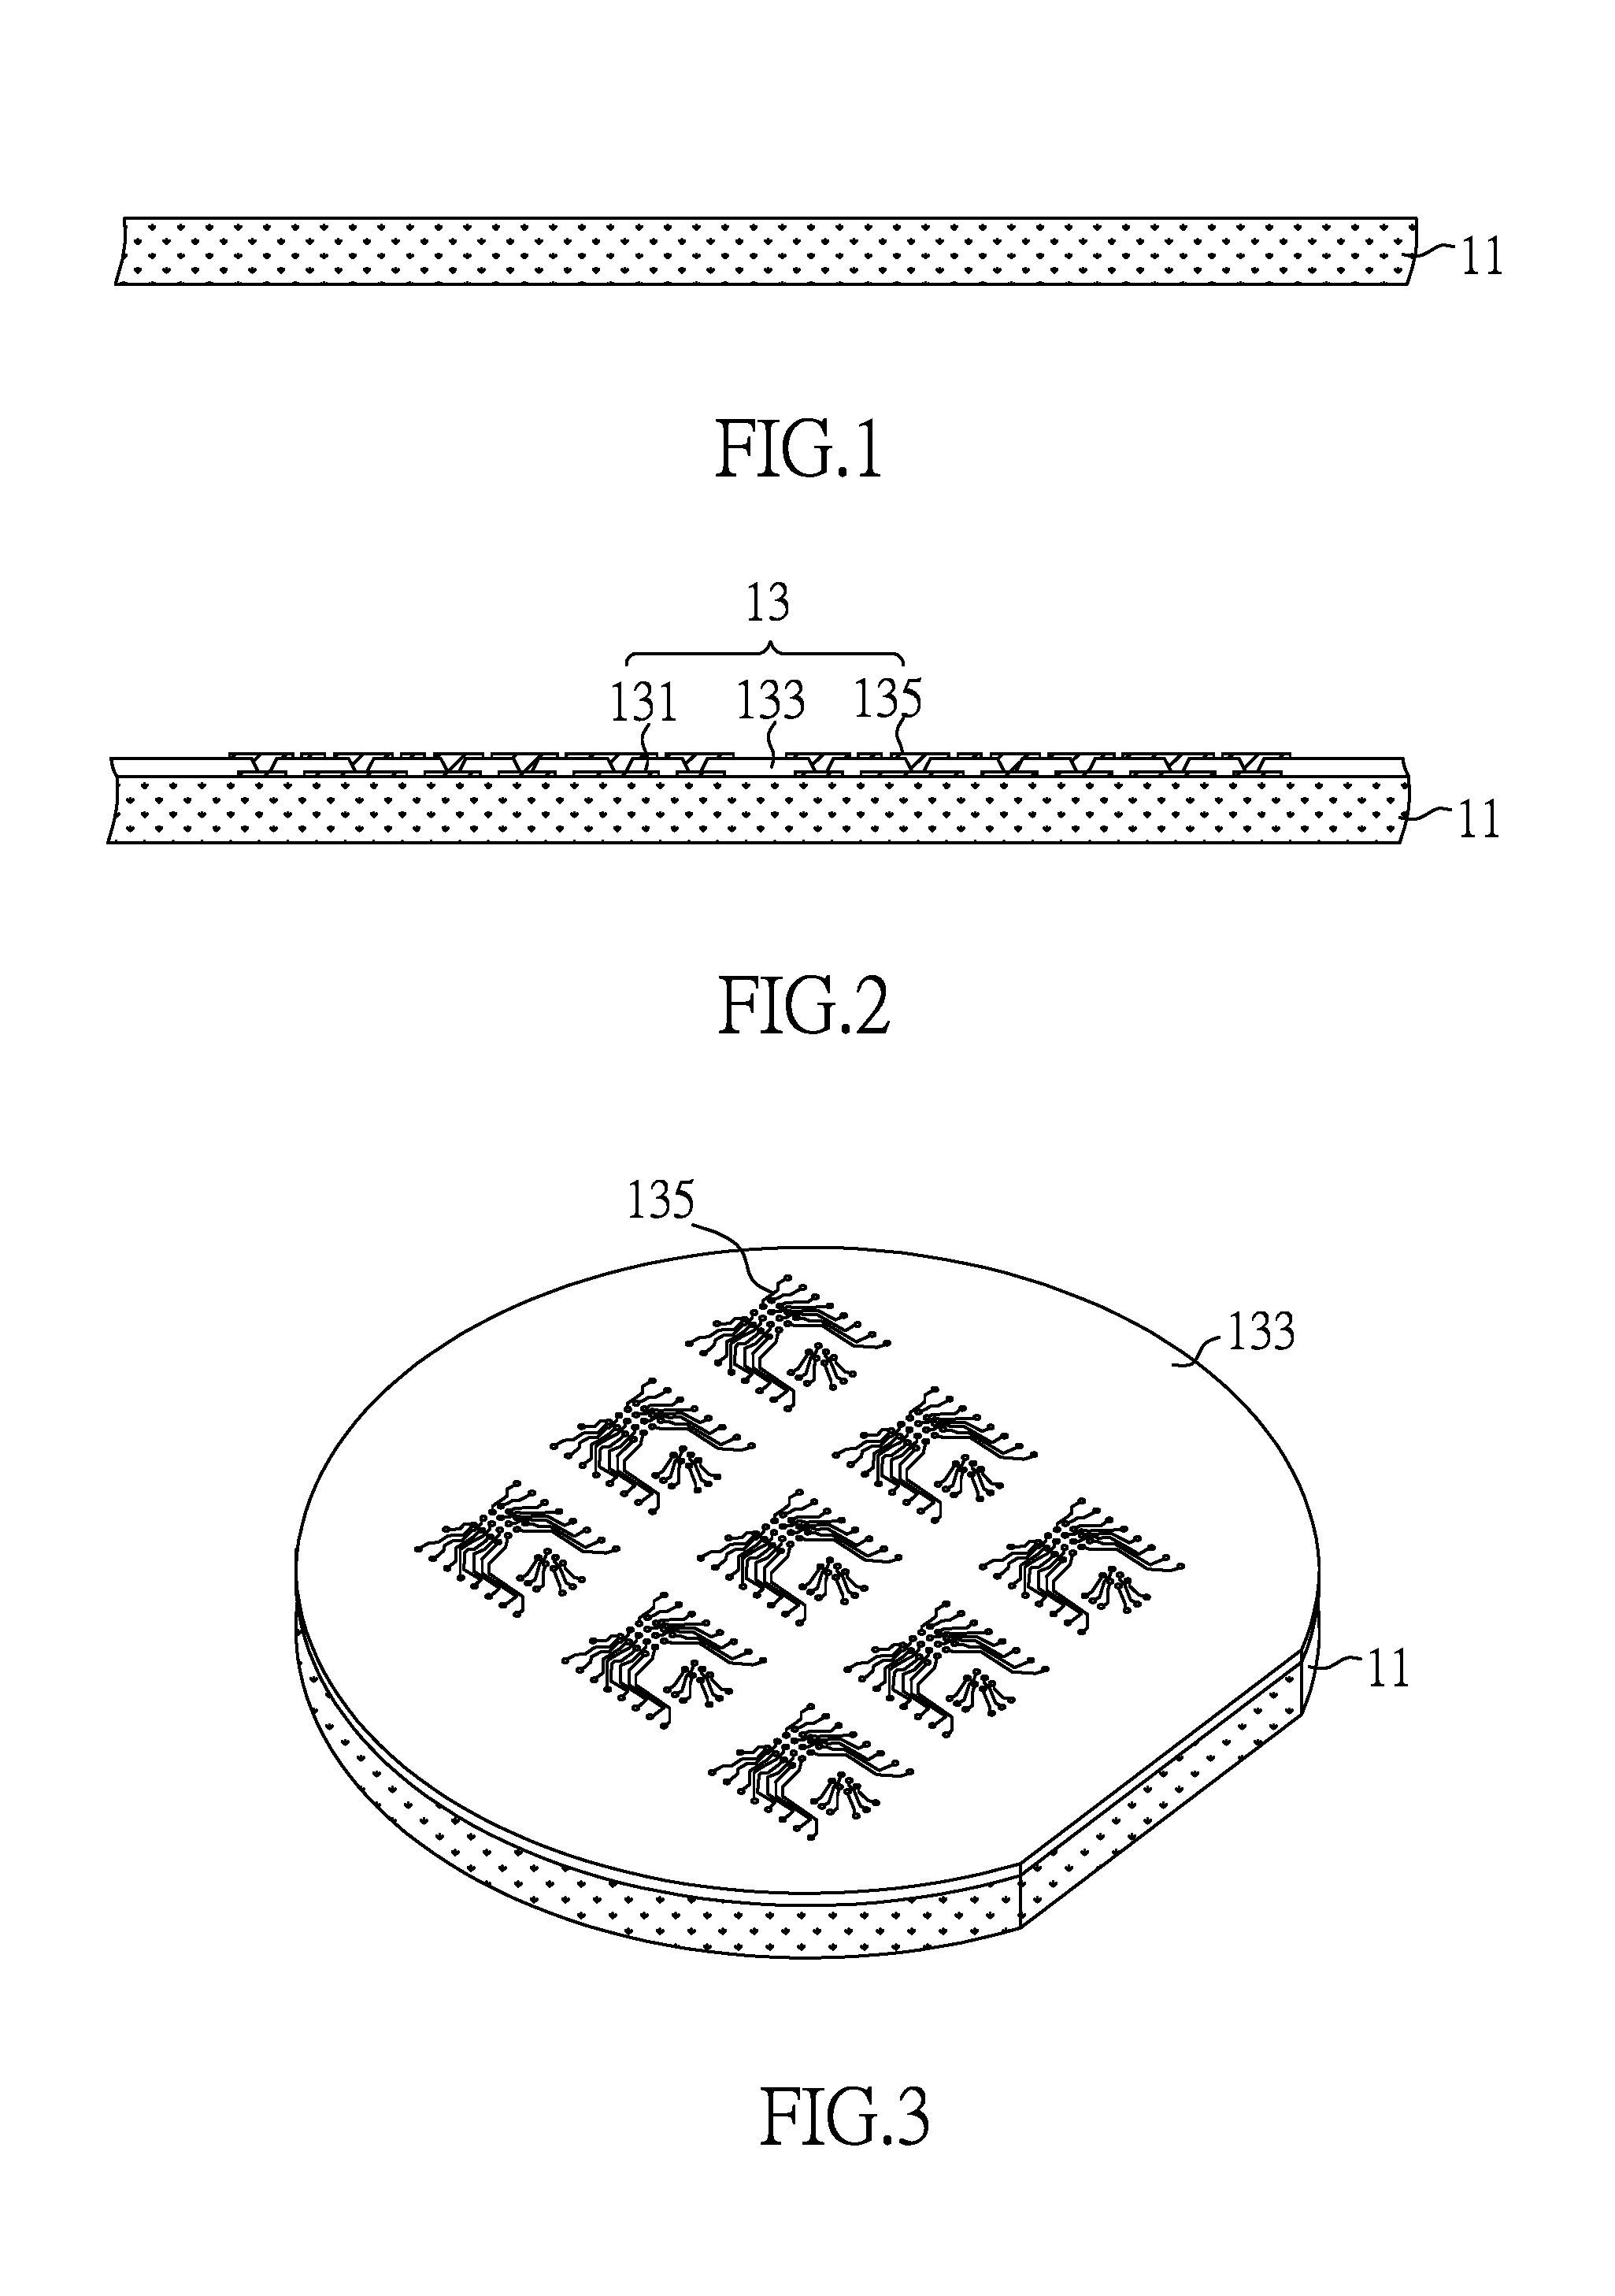 Package-on-package semiconductor assembly having bottom device confined by dielectric recess